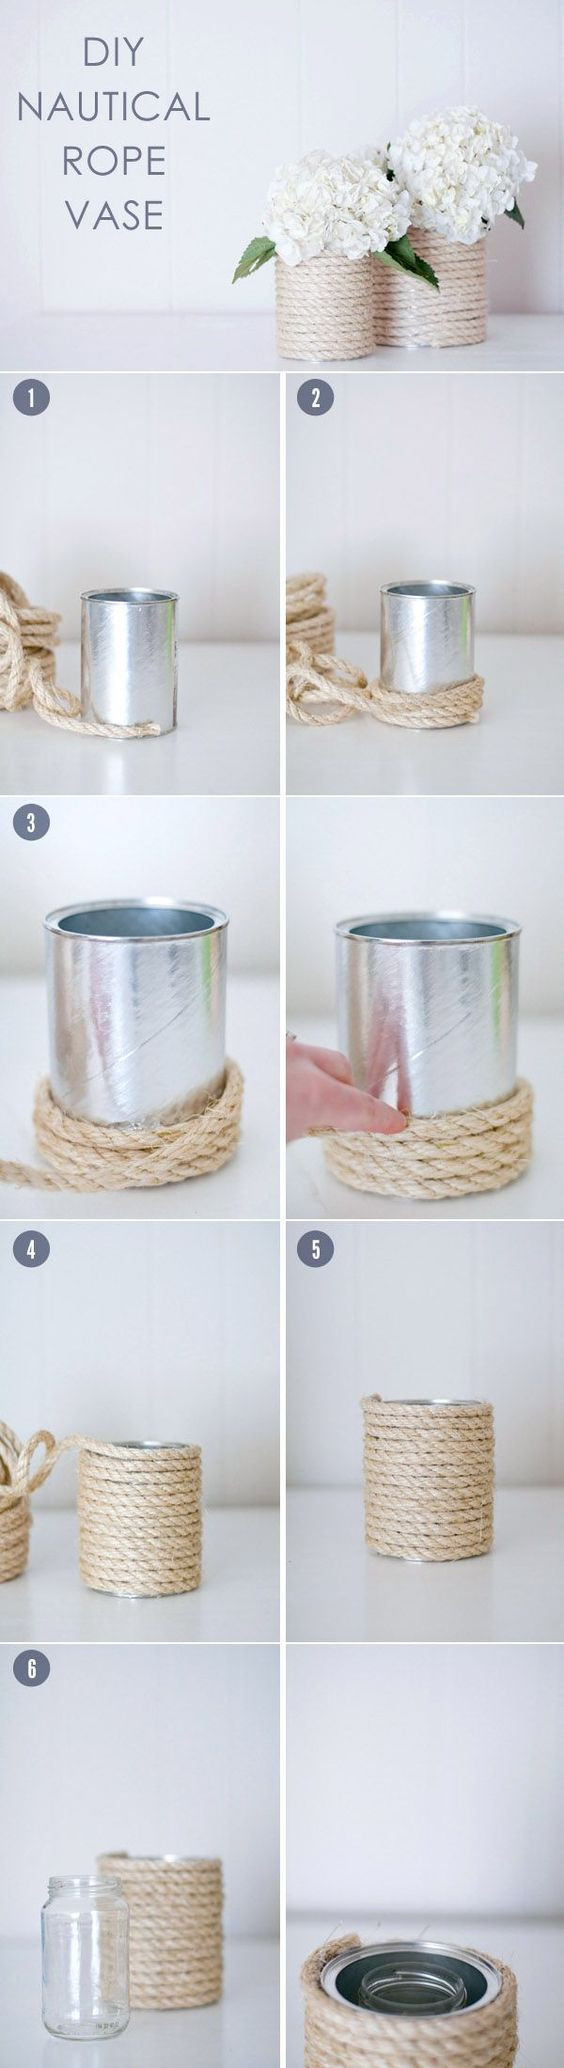 Nautical DIY Decorations
 30 DIY Nautical Decor Projects Bringing the Beach To your Home